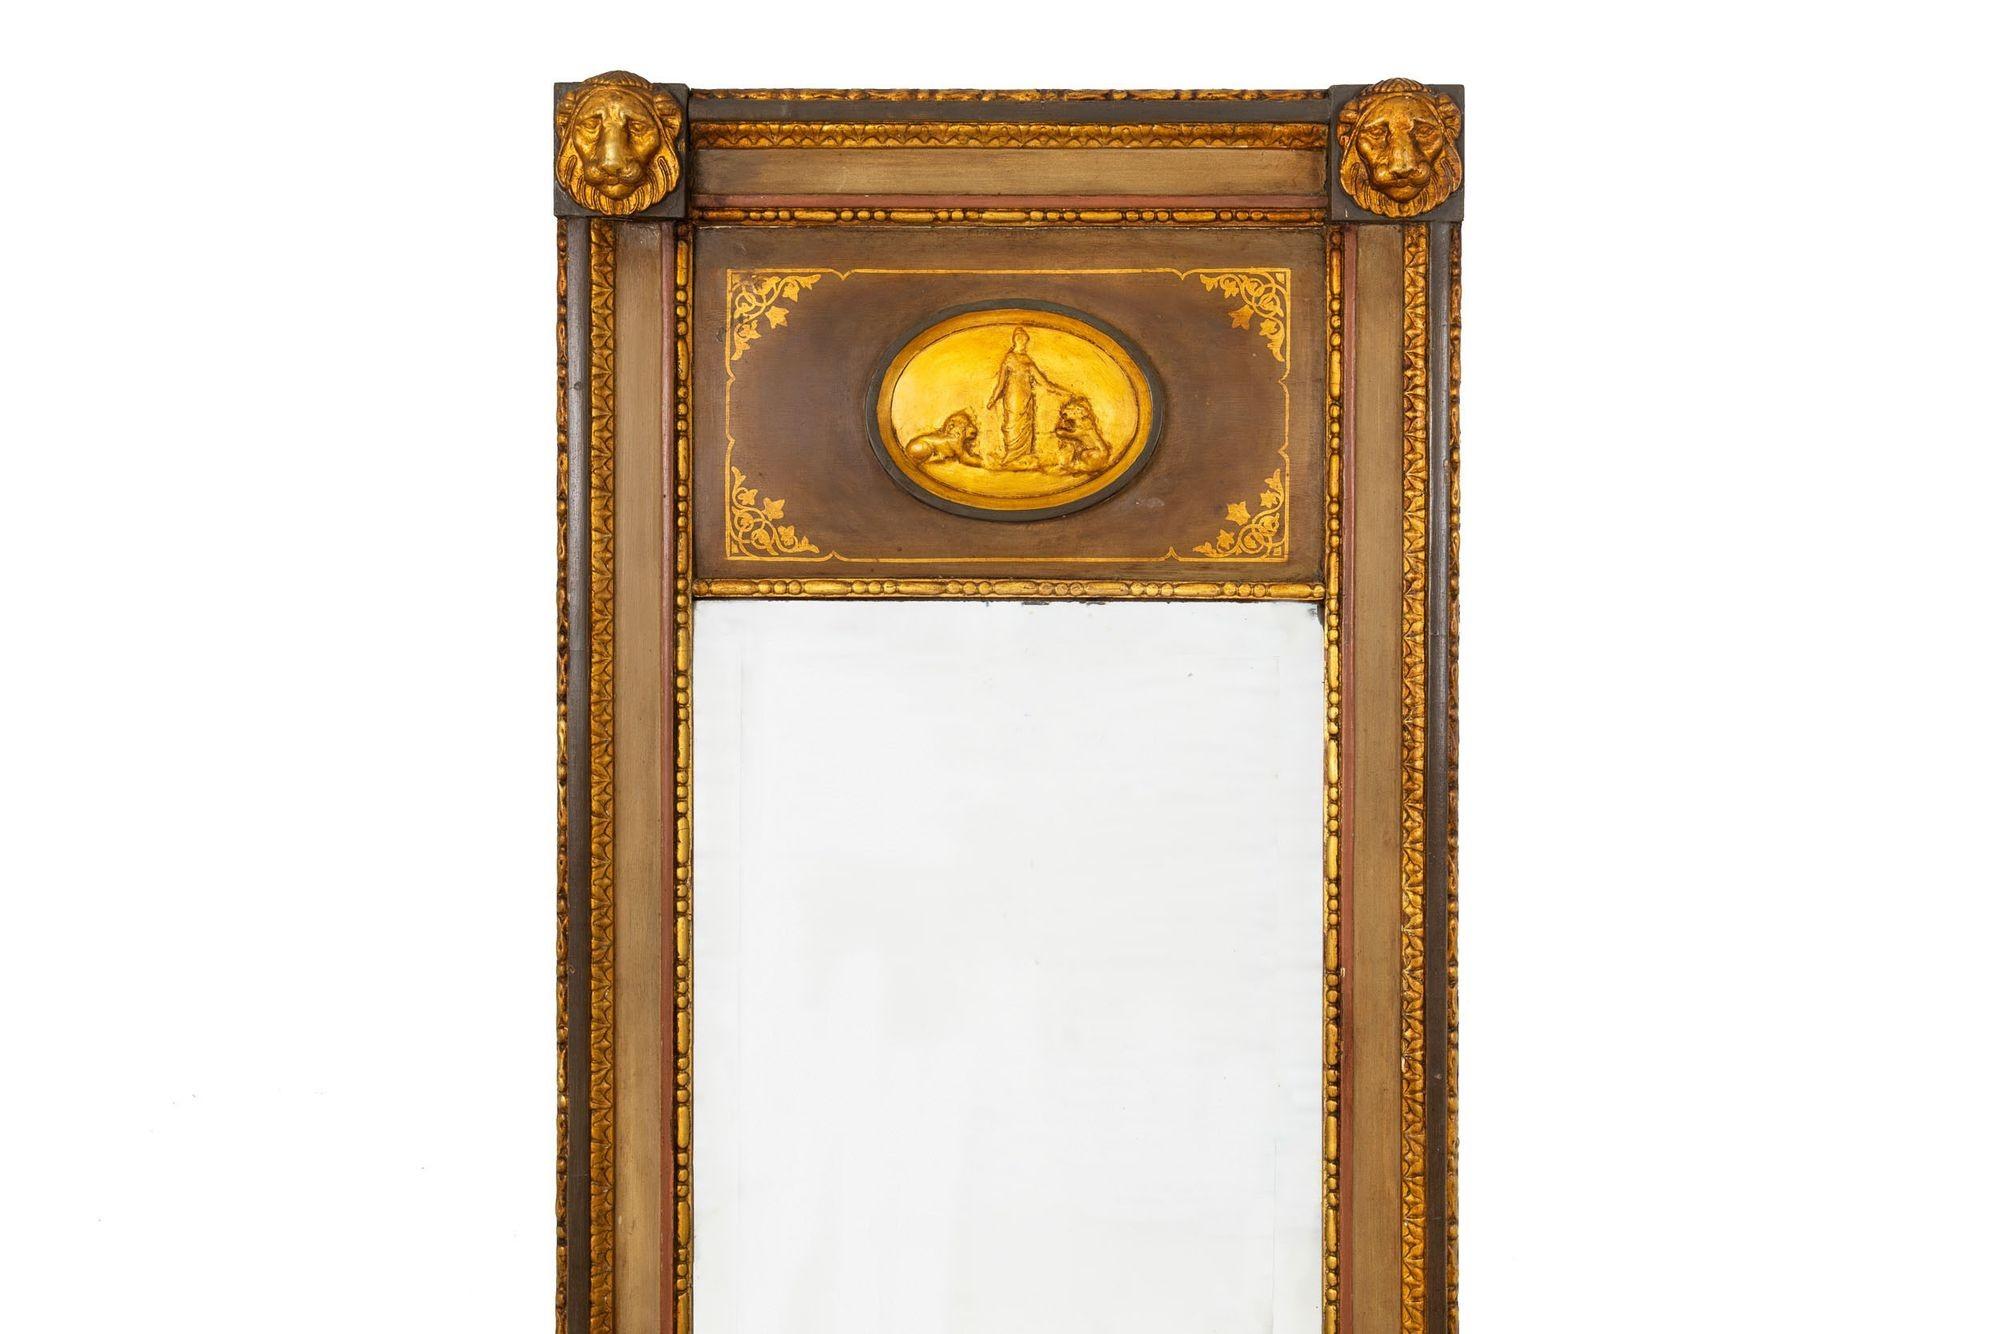 NEOCLASSICAL POLYCHROMED AND PARCEL-GILT PIER MIRROR
Northern European, circa late 19th century
Item # 307PMQ13Q 

Featuring a rectangular elongated form of gilded molded-gesso borders of anthemion, acanthus and bead-and-dart motif with painted